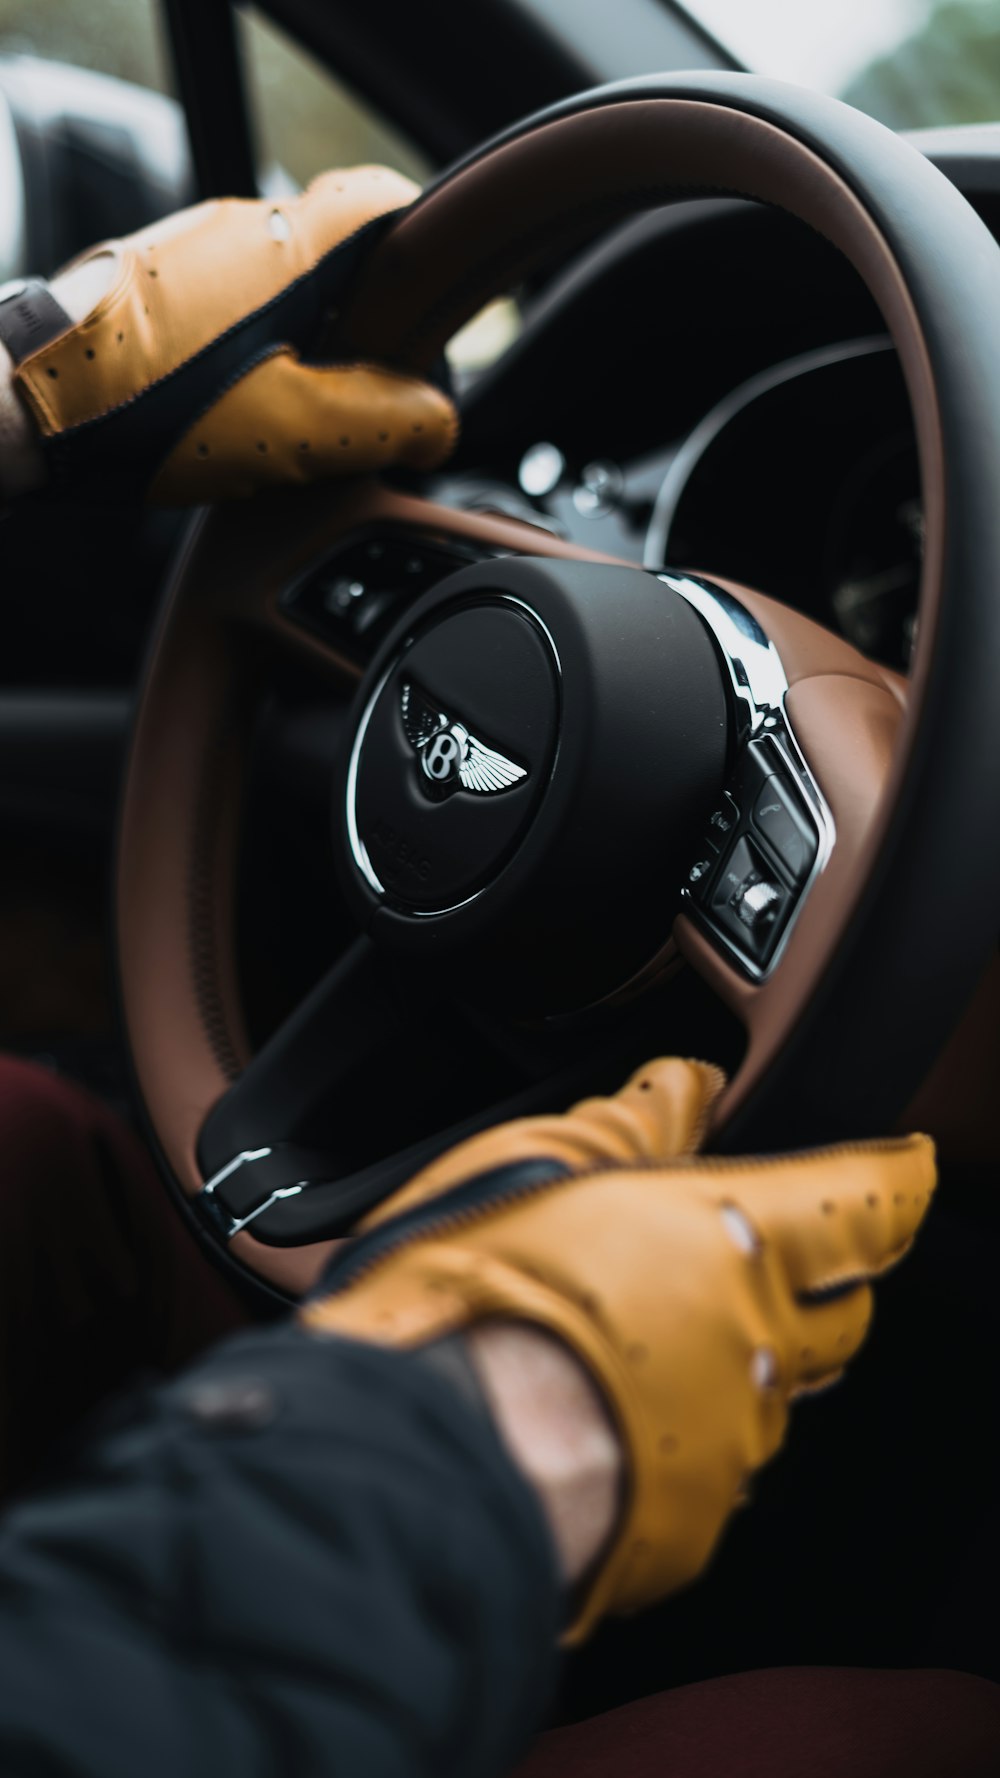 person holding black and silver nissan steering wheel